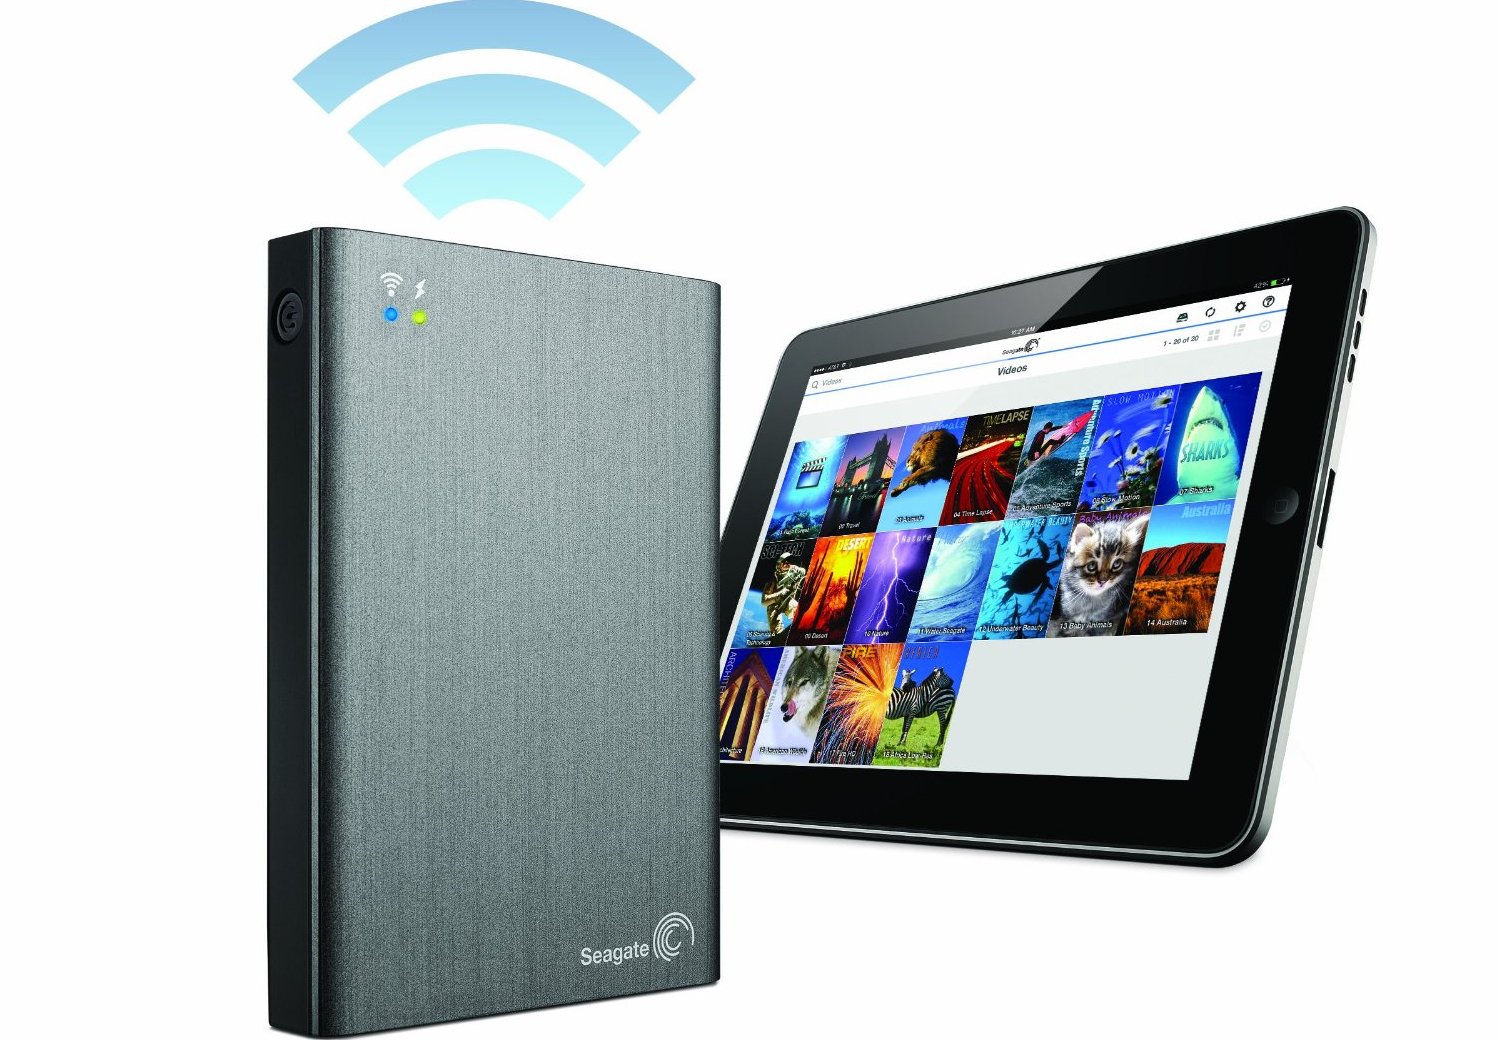 The-Wireless-HDD-Is-Becoming-Popular-What-Are-The-Benefits-Technobezz-2